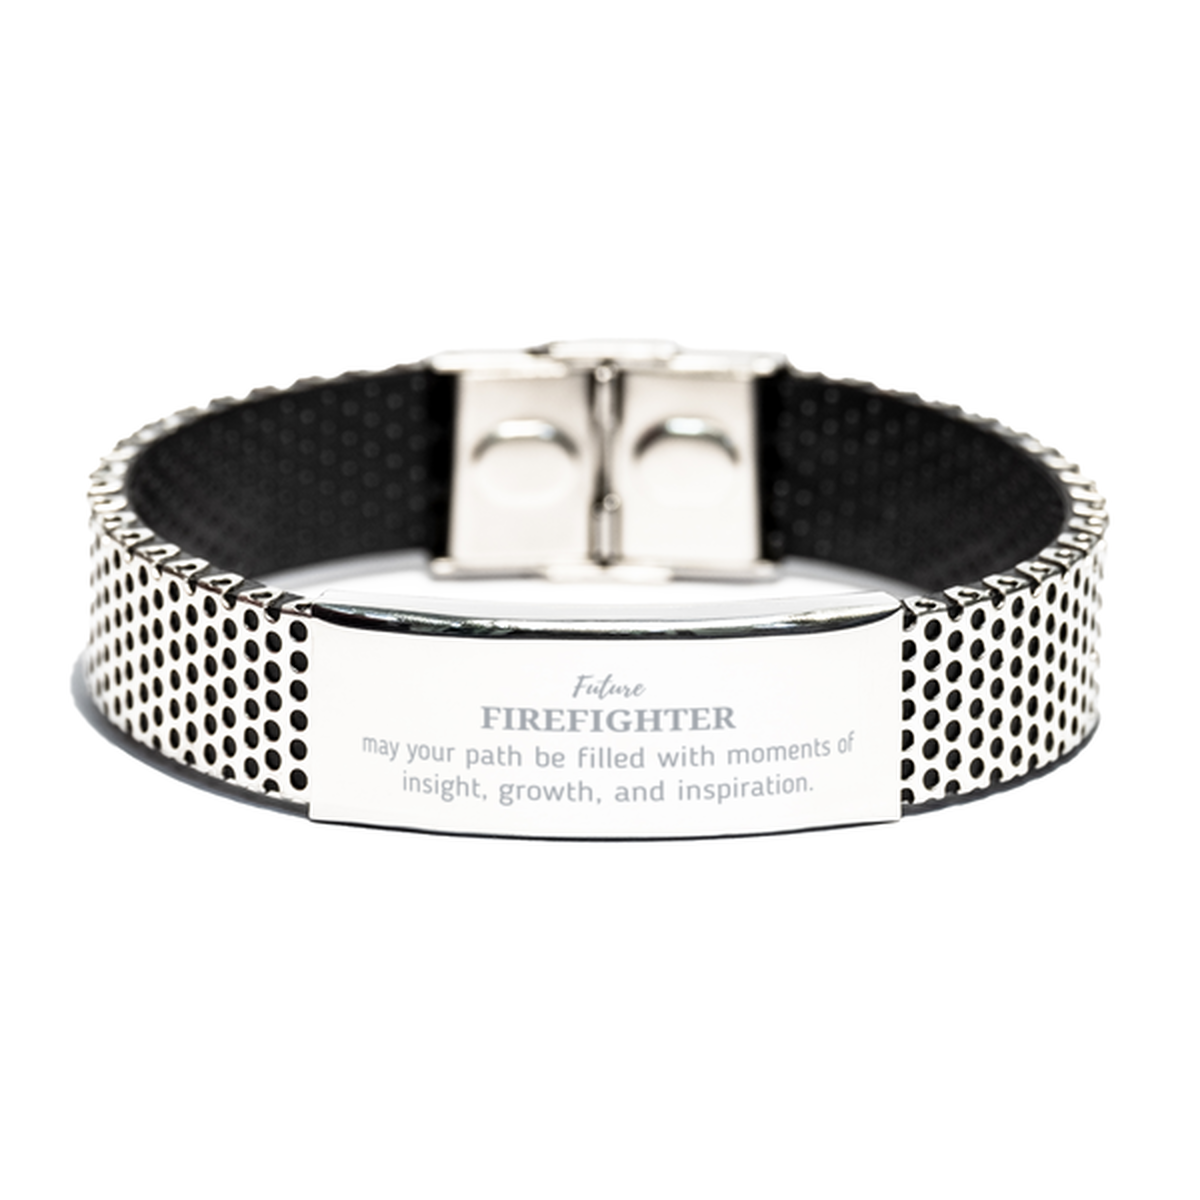 Future Firefighter Gifts, May your path be filled with moments of insight, Graduation Gifts for New Firefighter, Christmas Unique Stainless Steel Bracelet For Men, Women, Friends